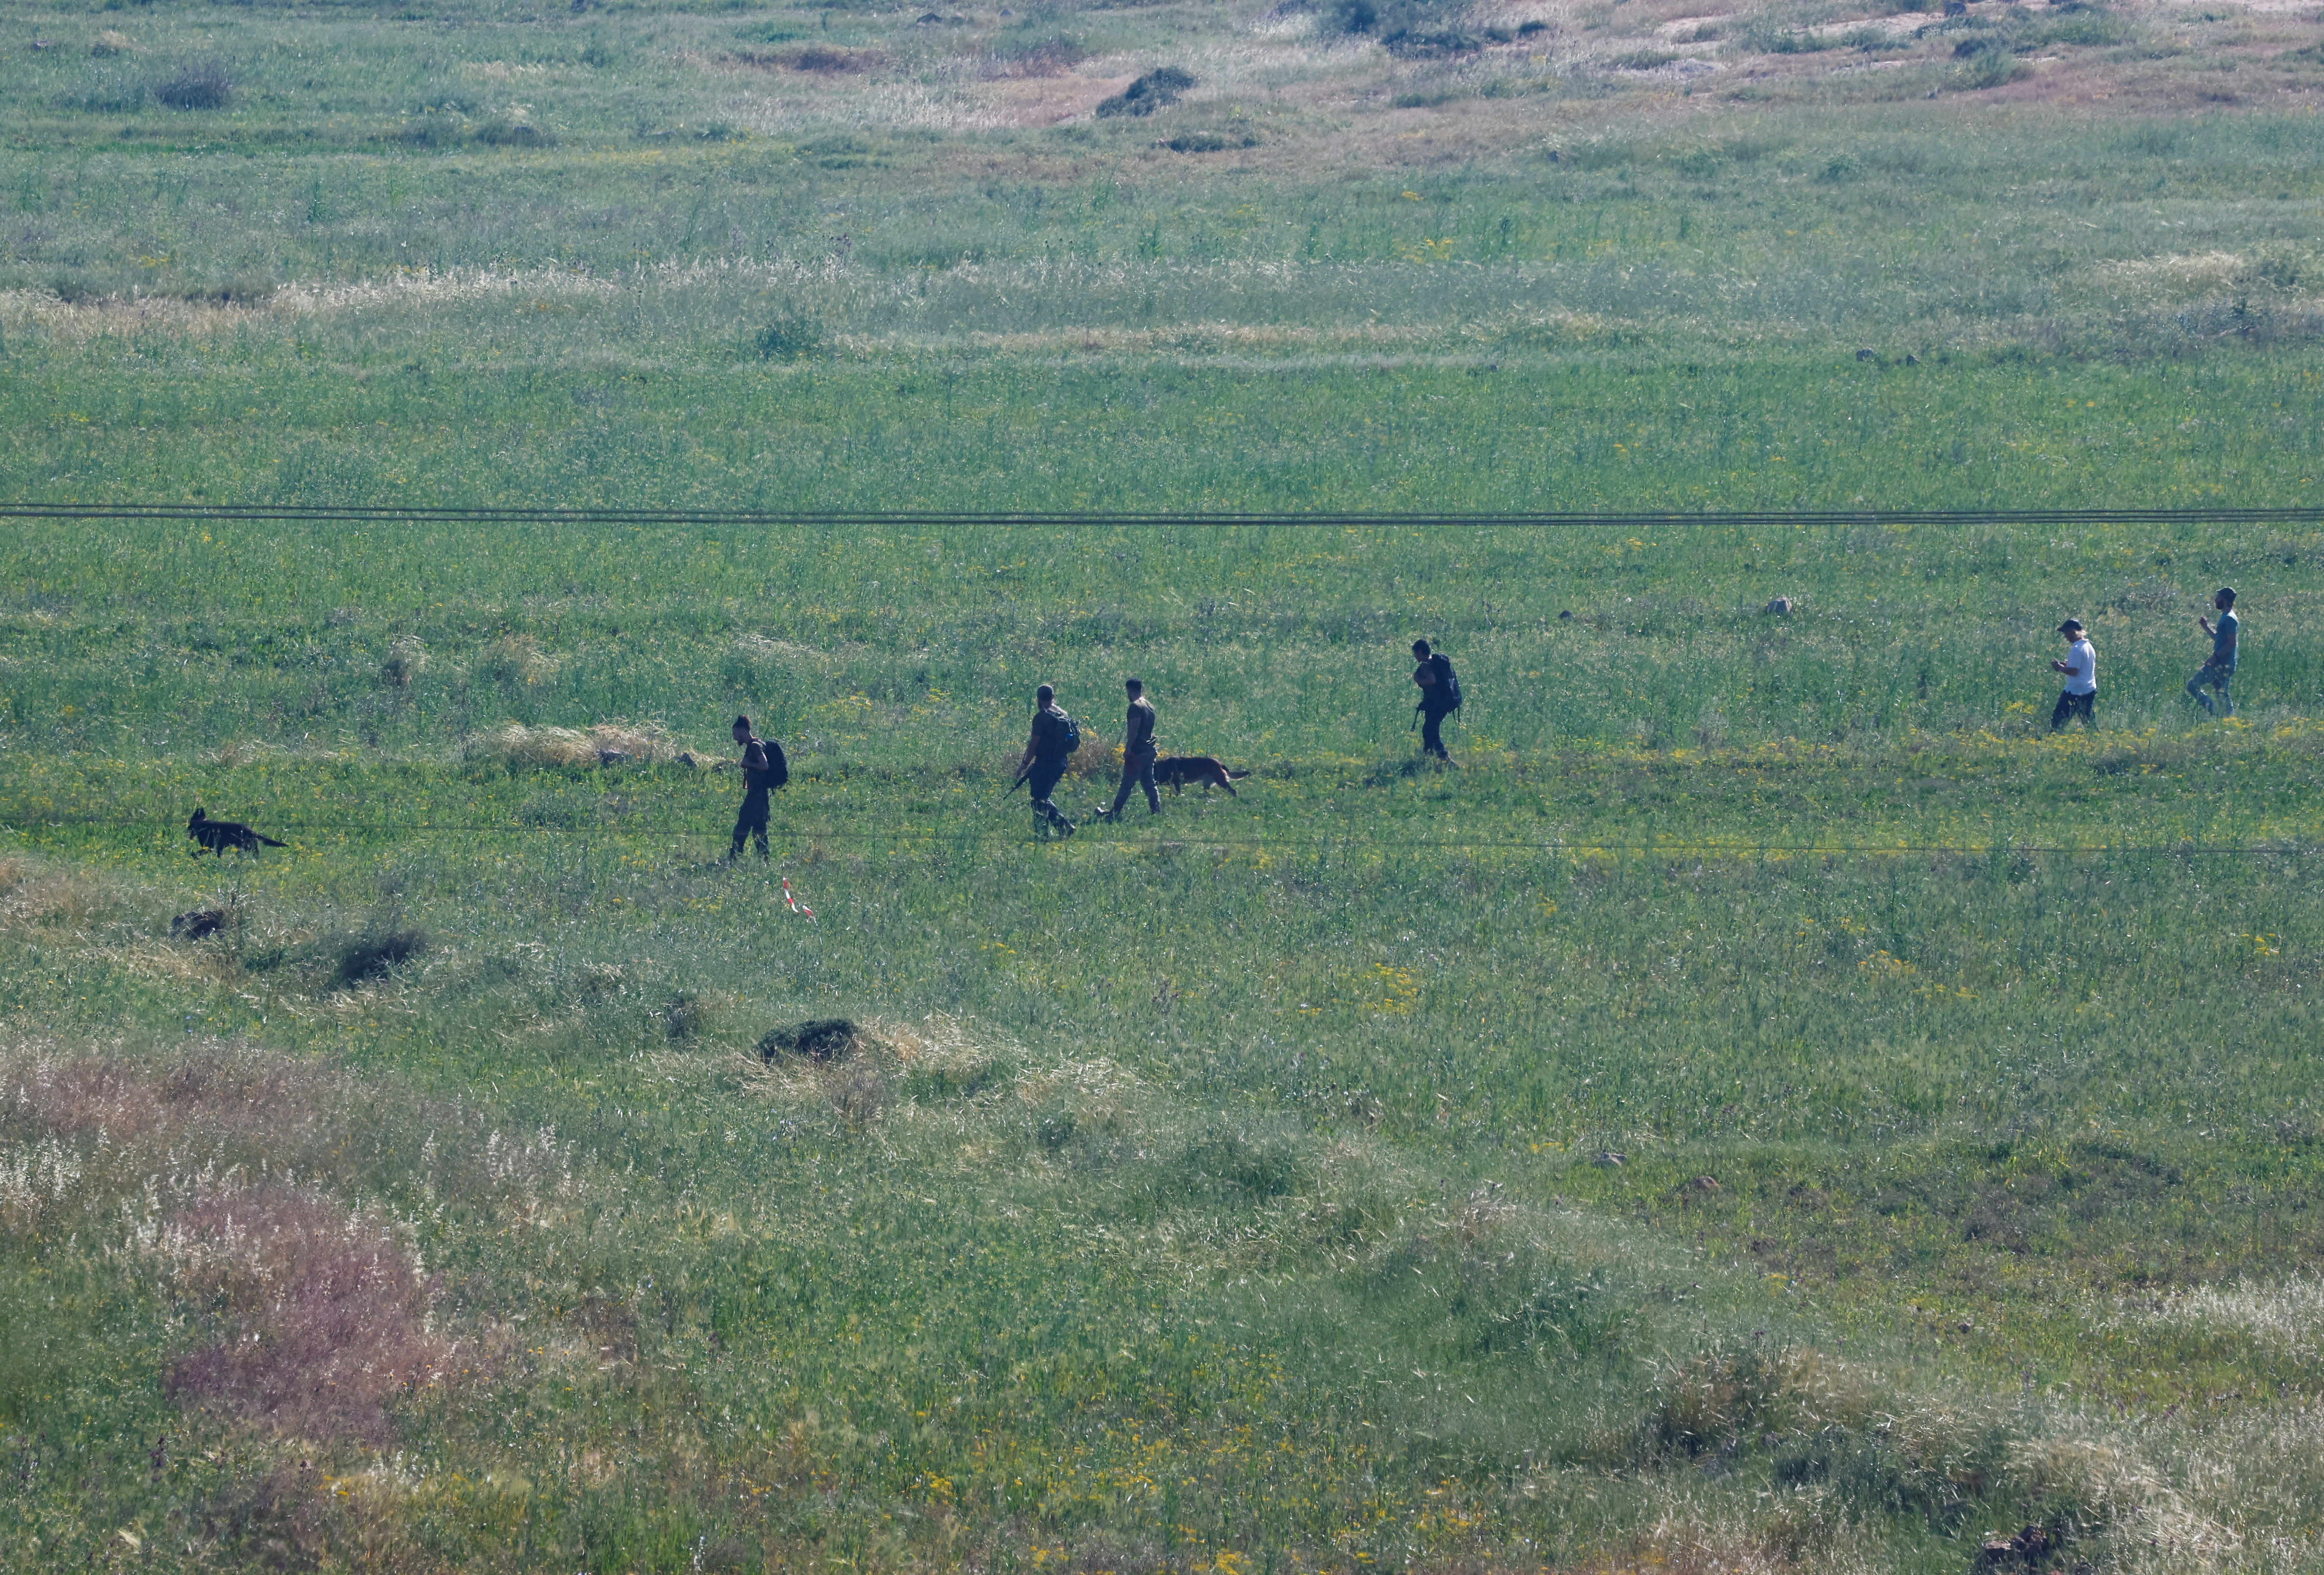 Israeli settlers look for a 14-year-old, who according to the Israeli military went missing in the area near the village of al-Mughayyer